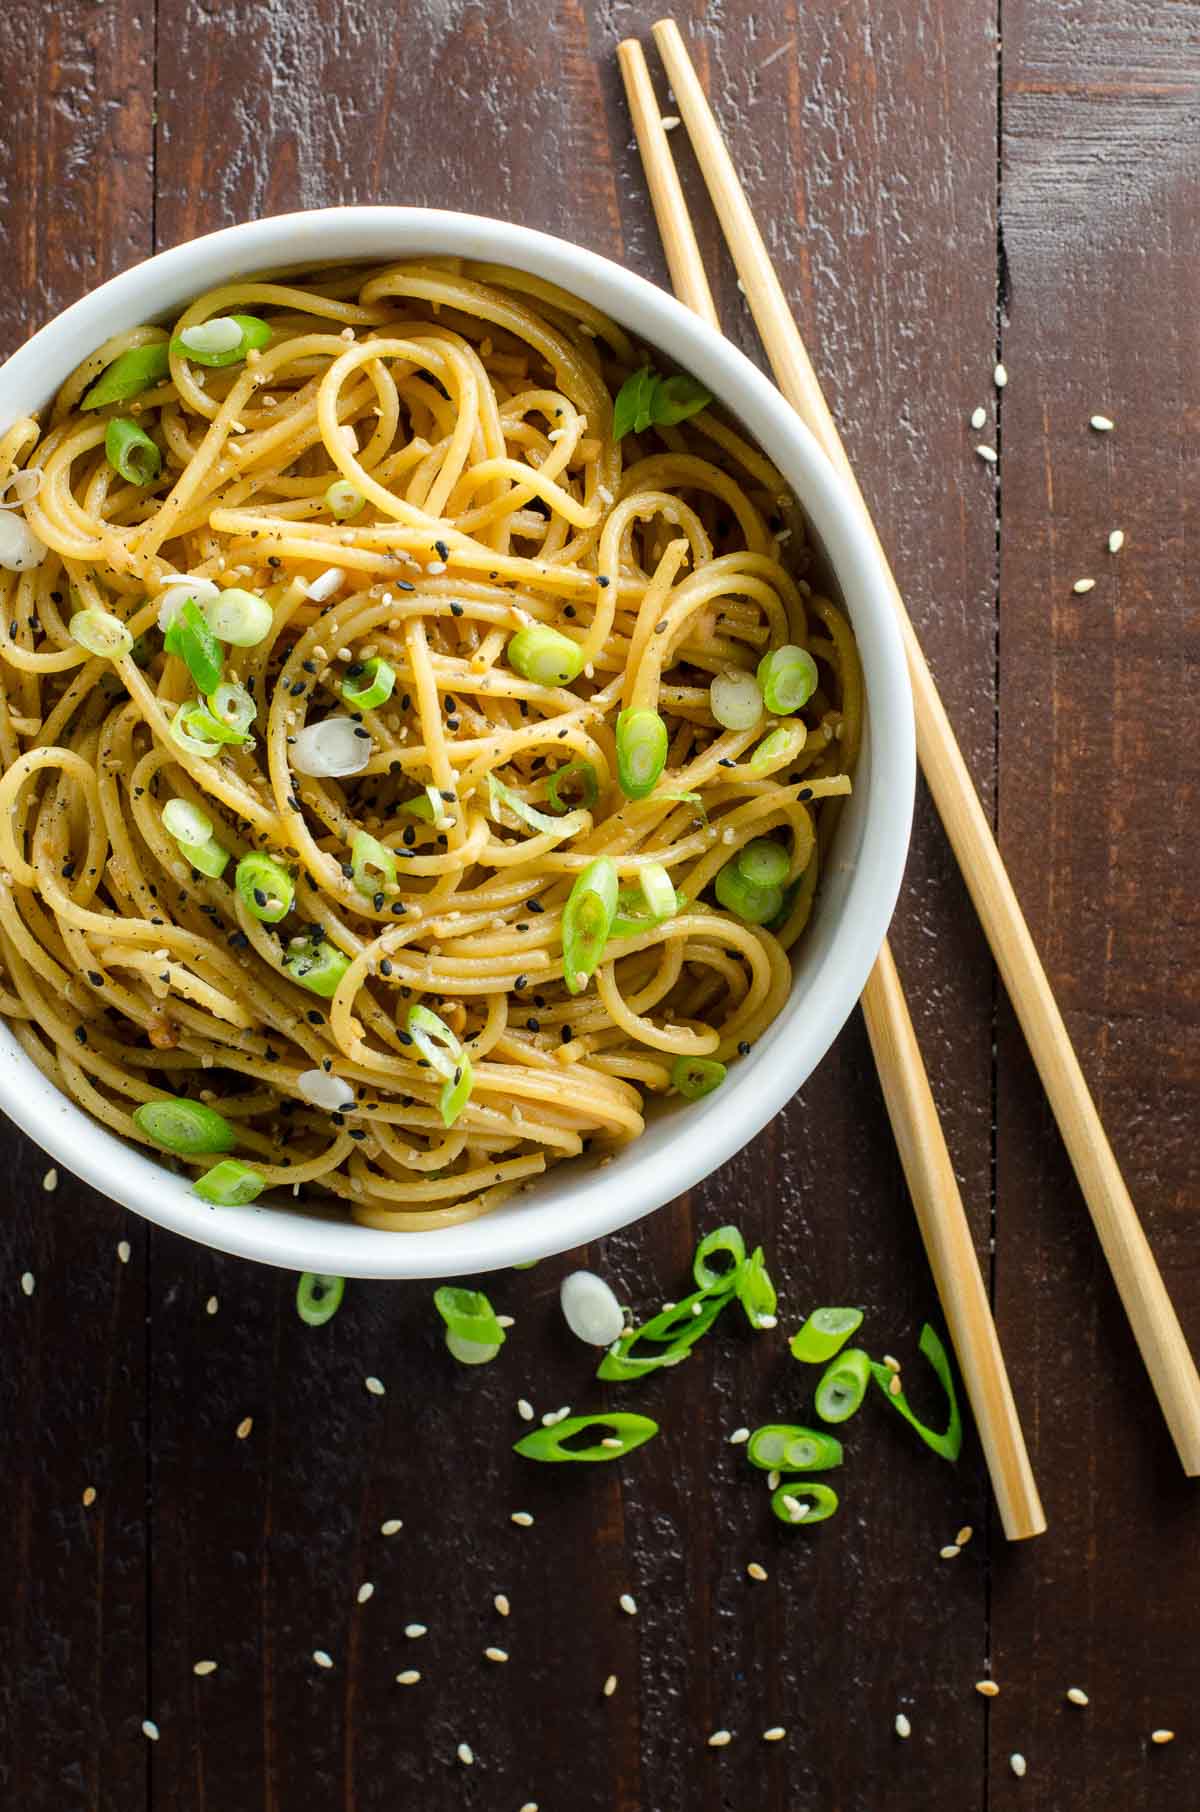 spicy sesame garlic noodles in a bowl with chopsticks